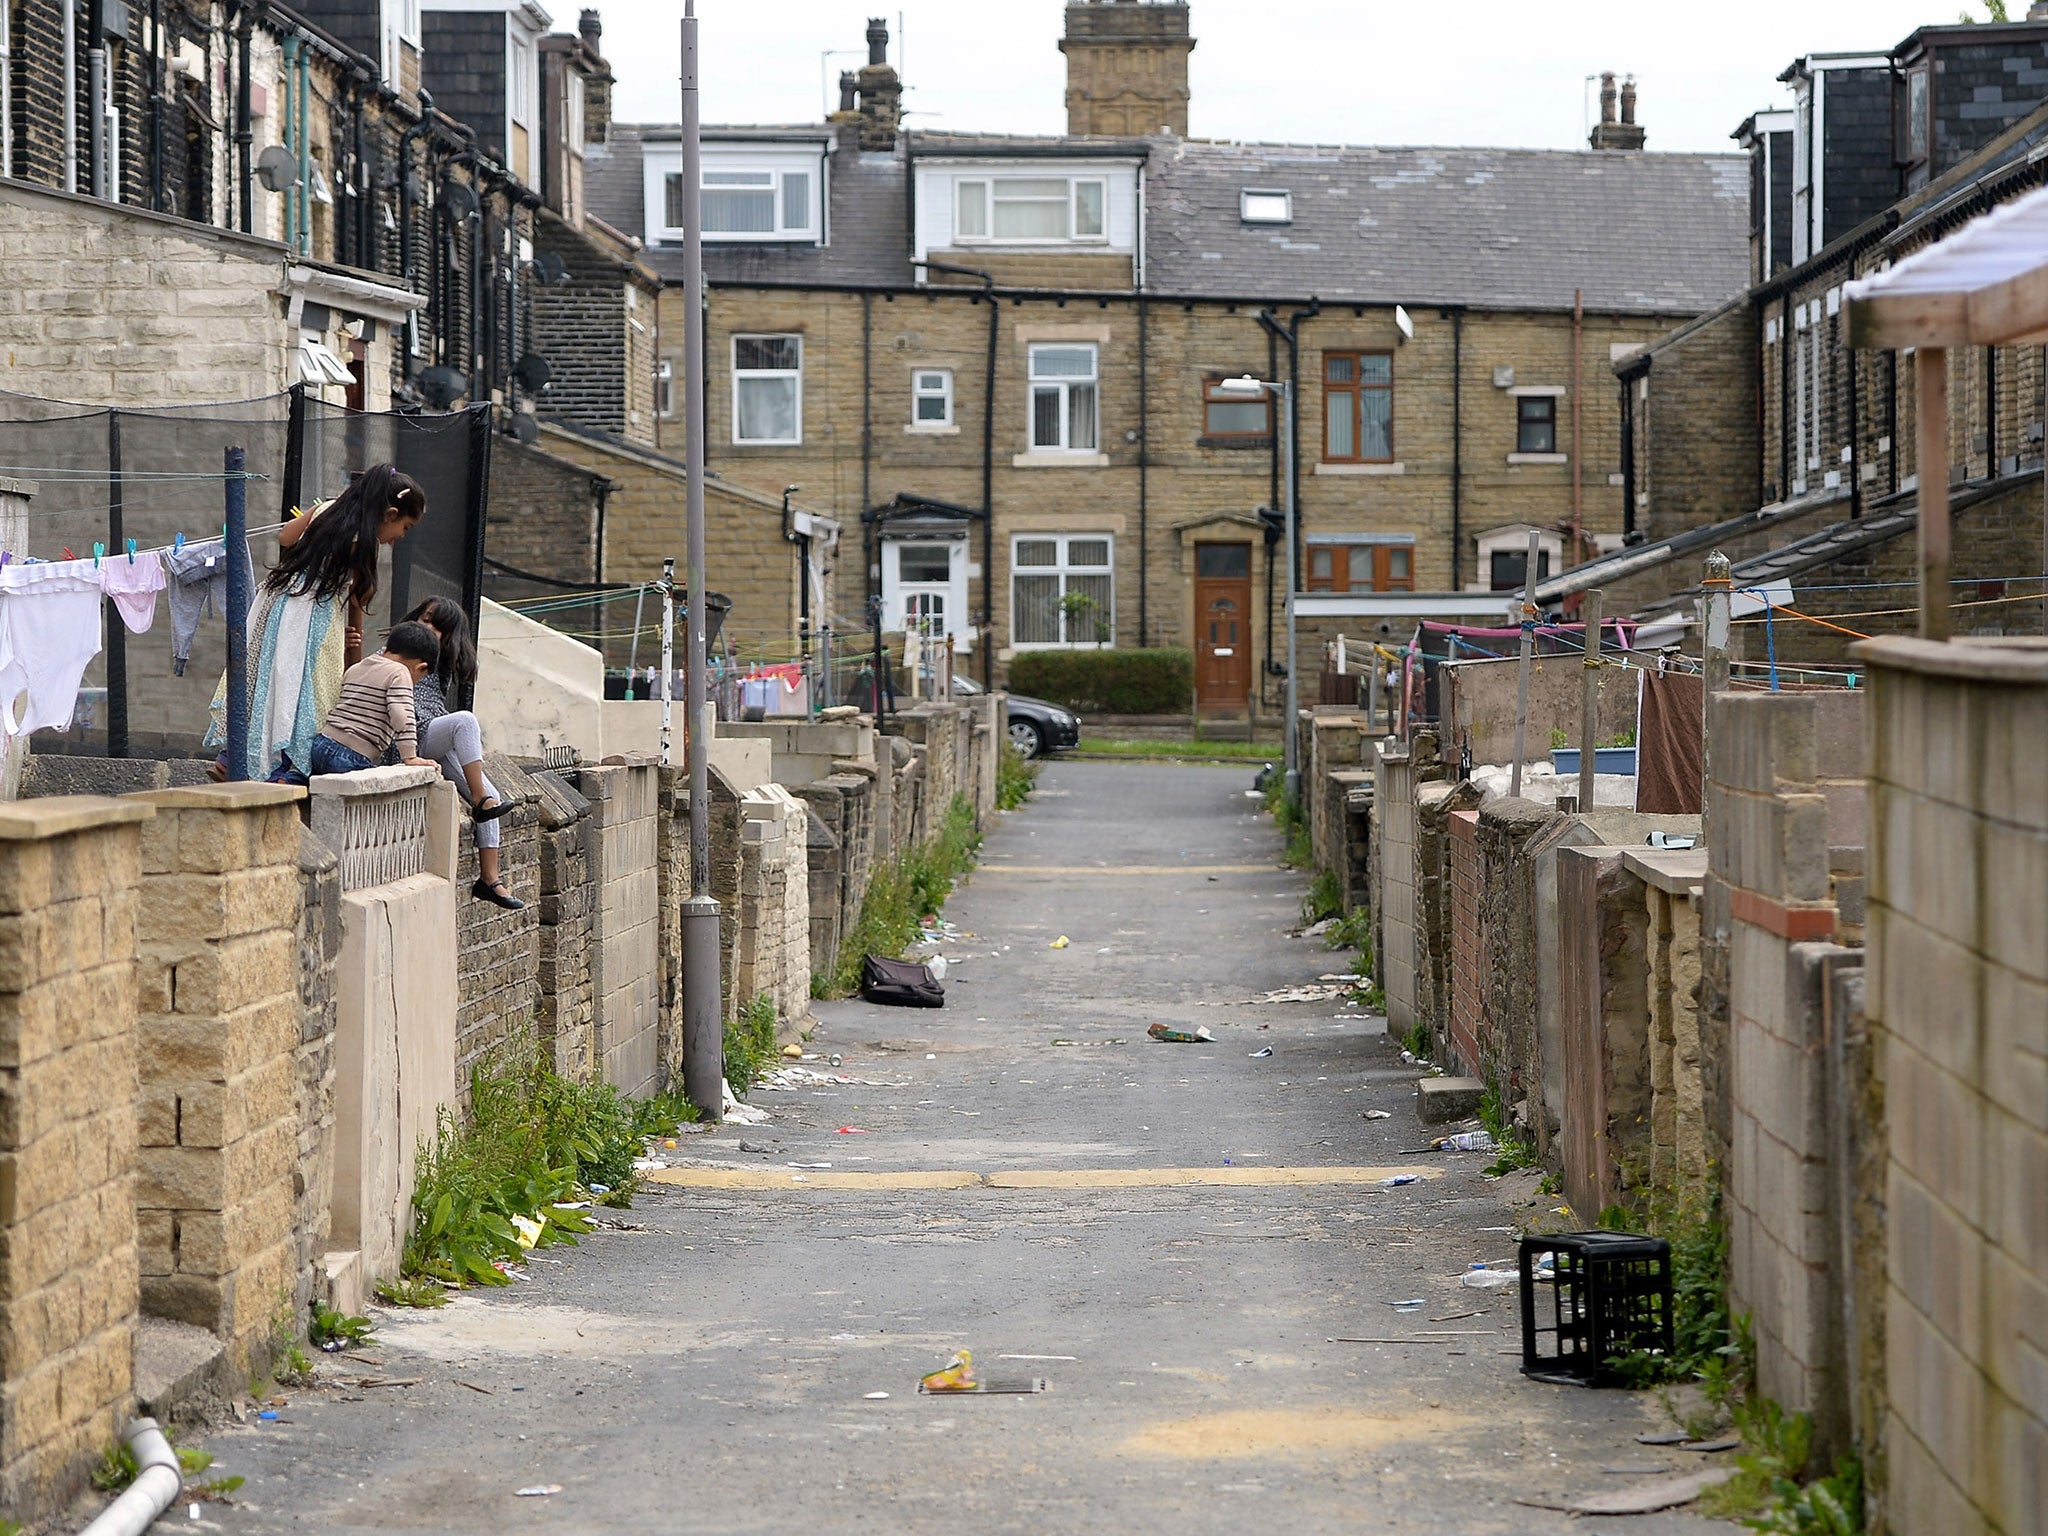 Bradford was among the areas with the highest number of children known to be at risk